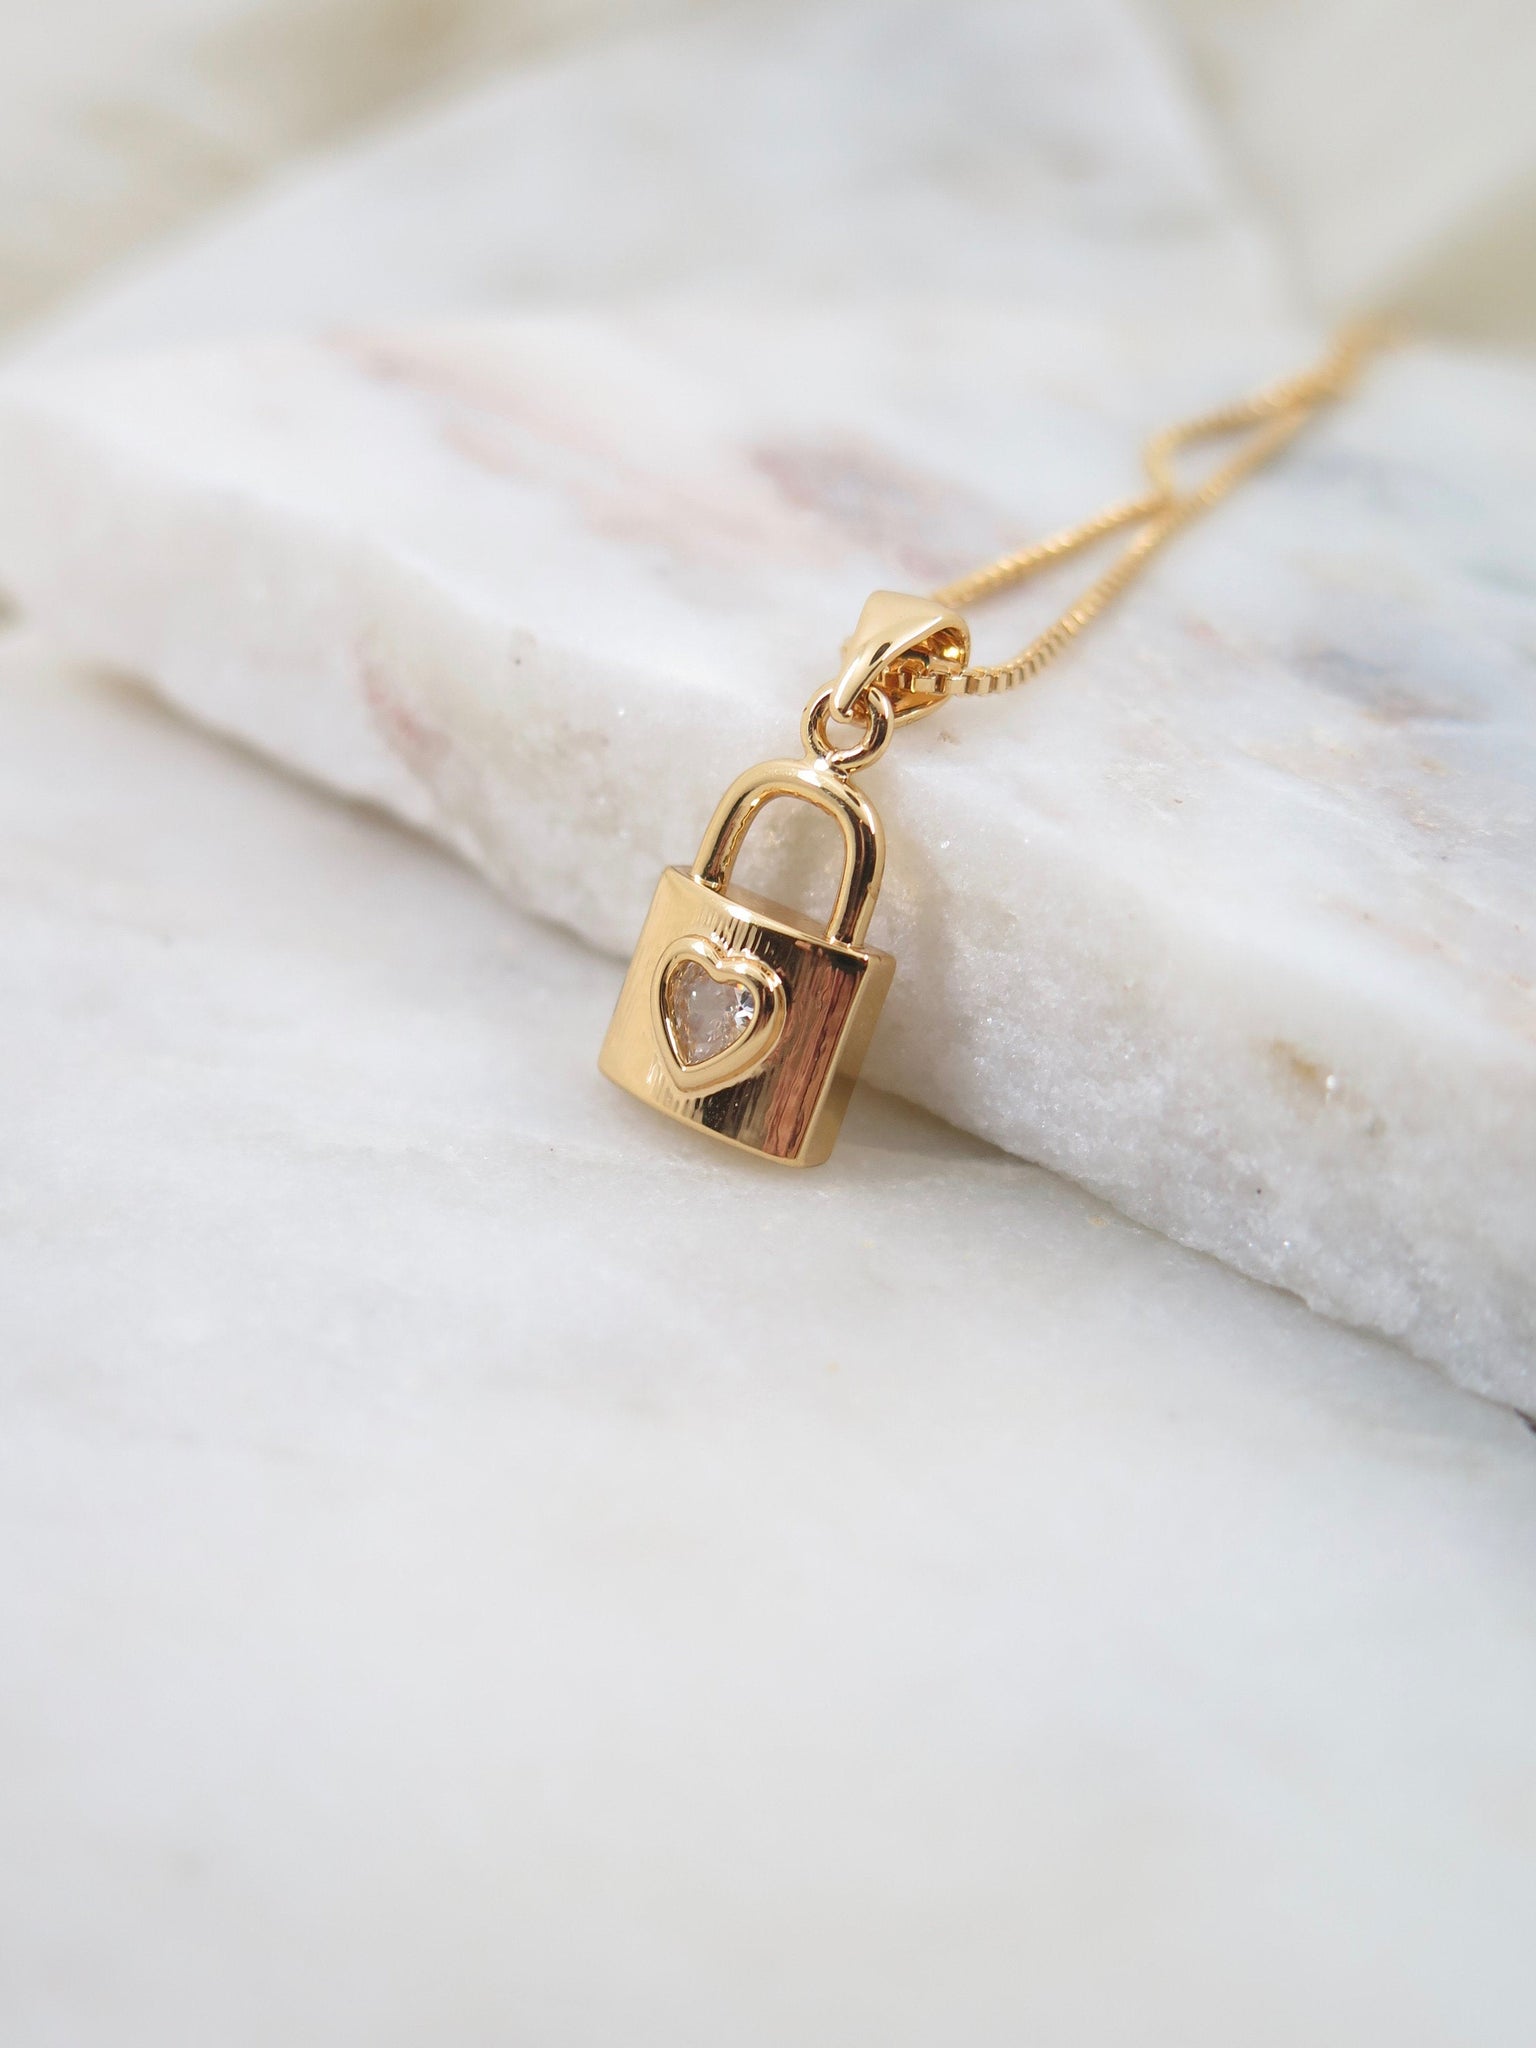 Tiny or Small Lock Necklace